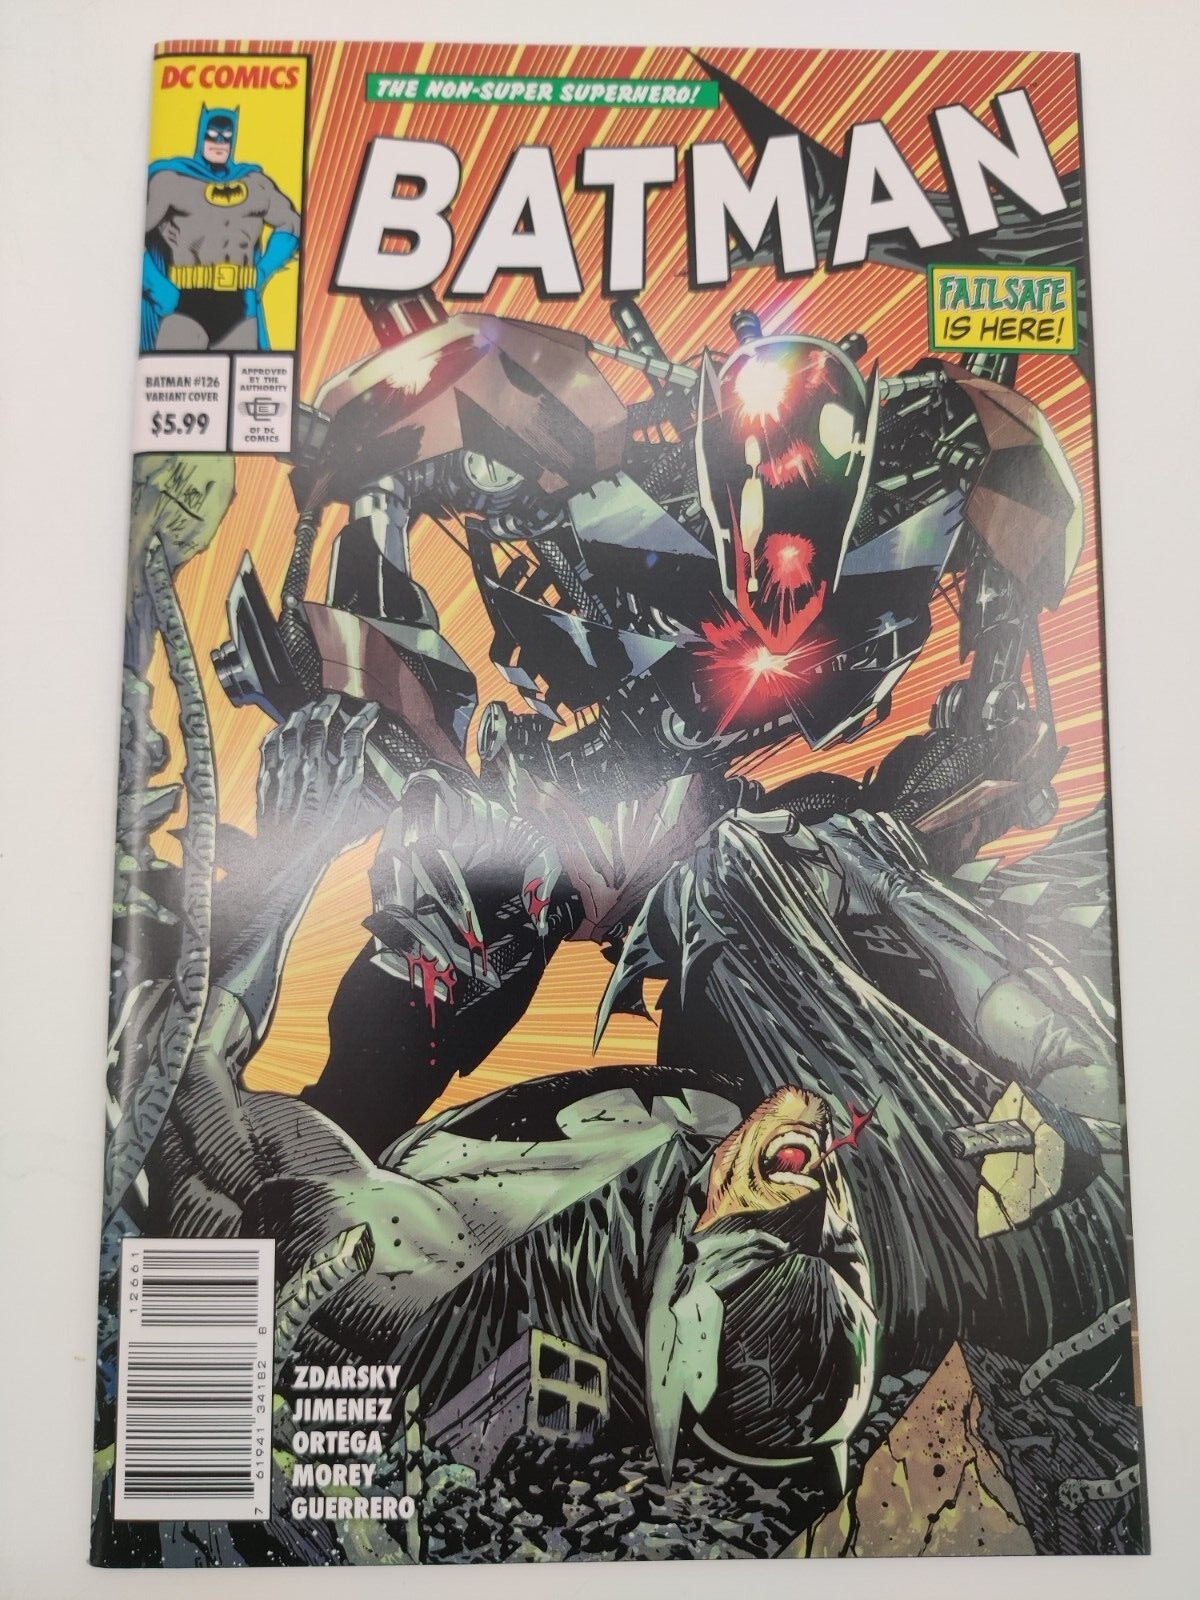 BATMAN #126 COVER C GUILLEM MARCH CARD STOCK VARIANT UNREAD NM OR BETTER COND.